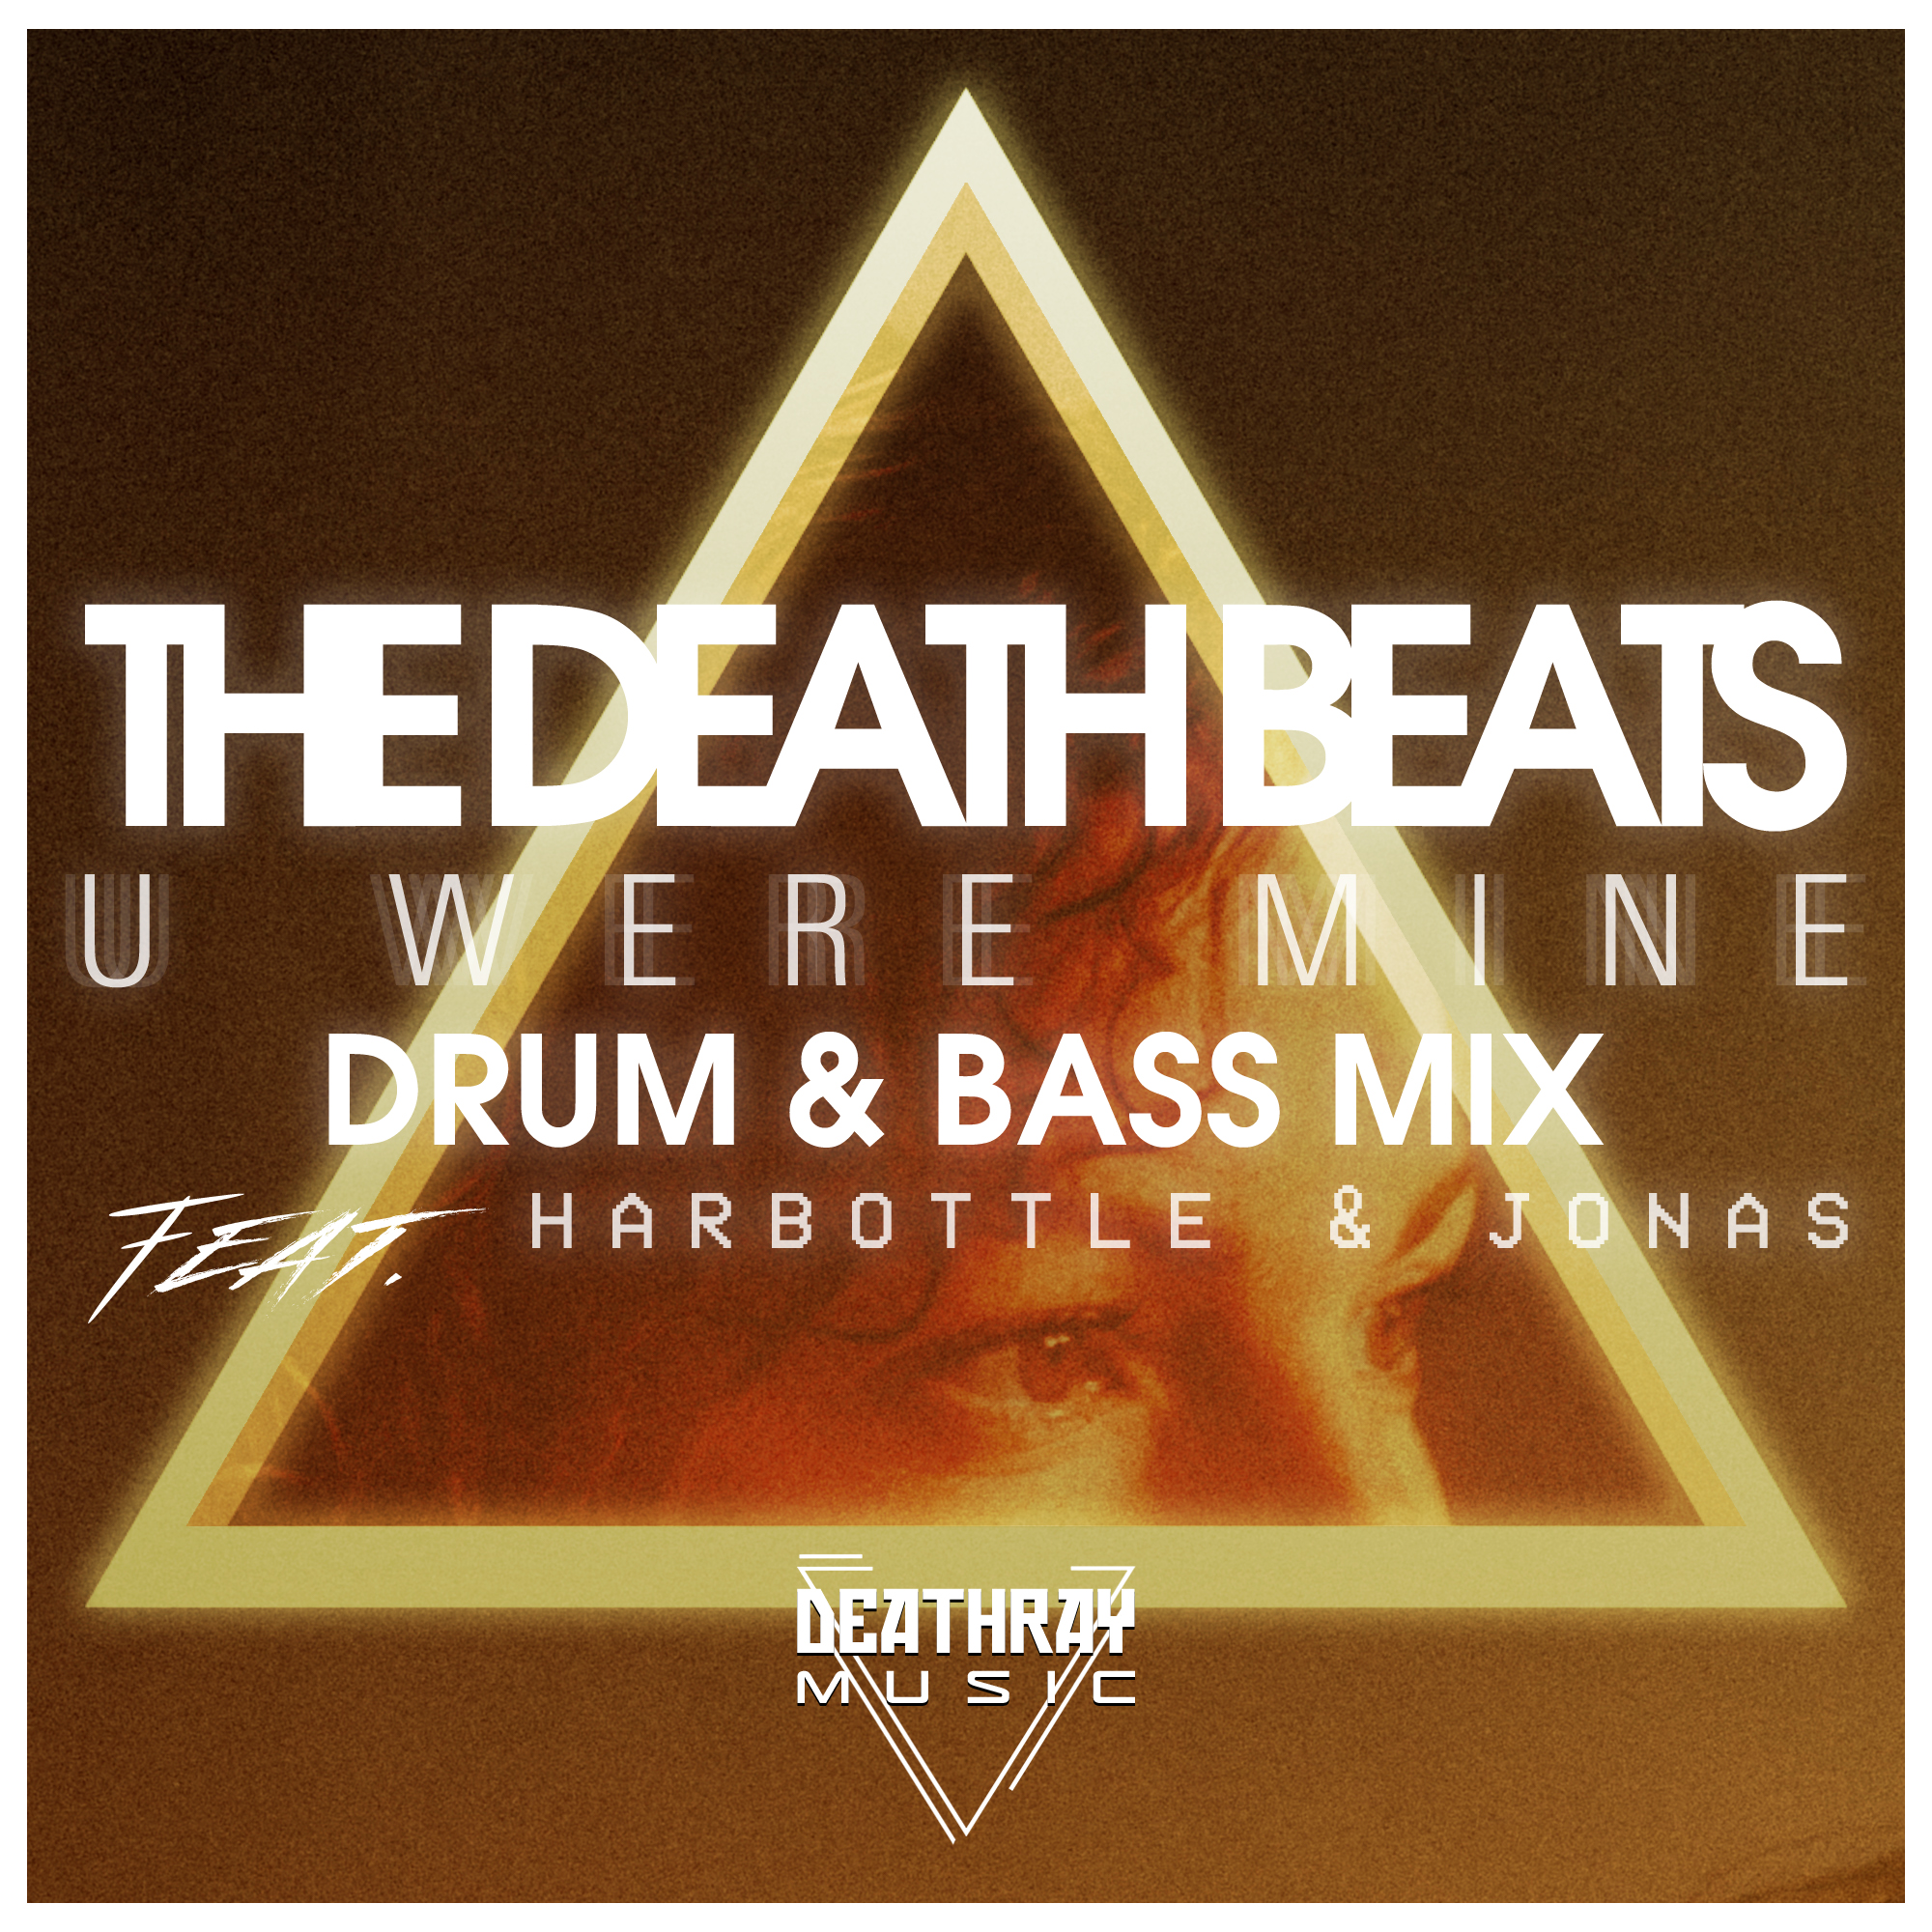 The Death Beats - You Were Mine featuring Harbottle and Jonas - Drum and Bass Mix